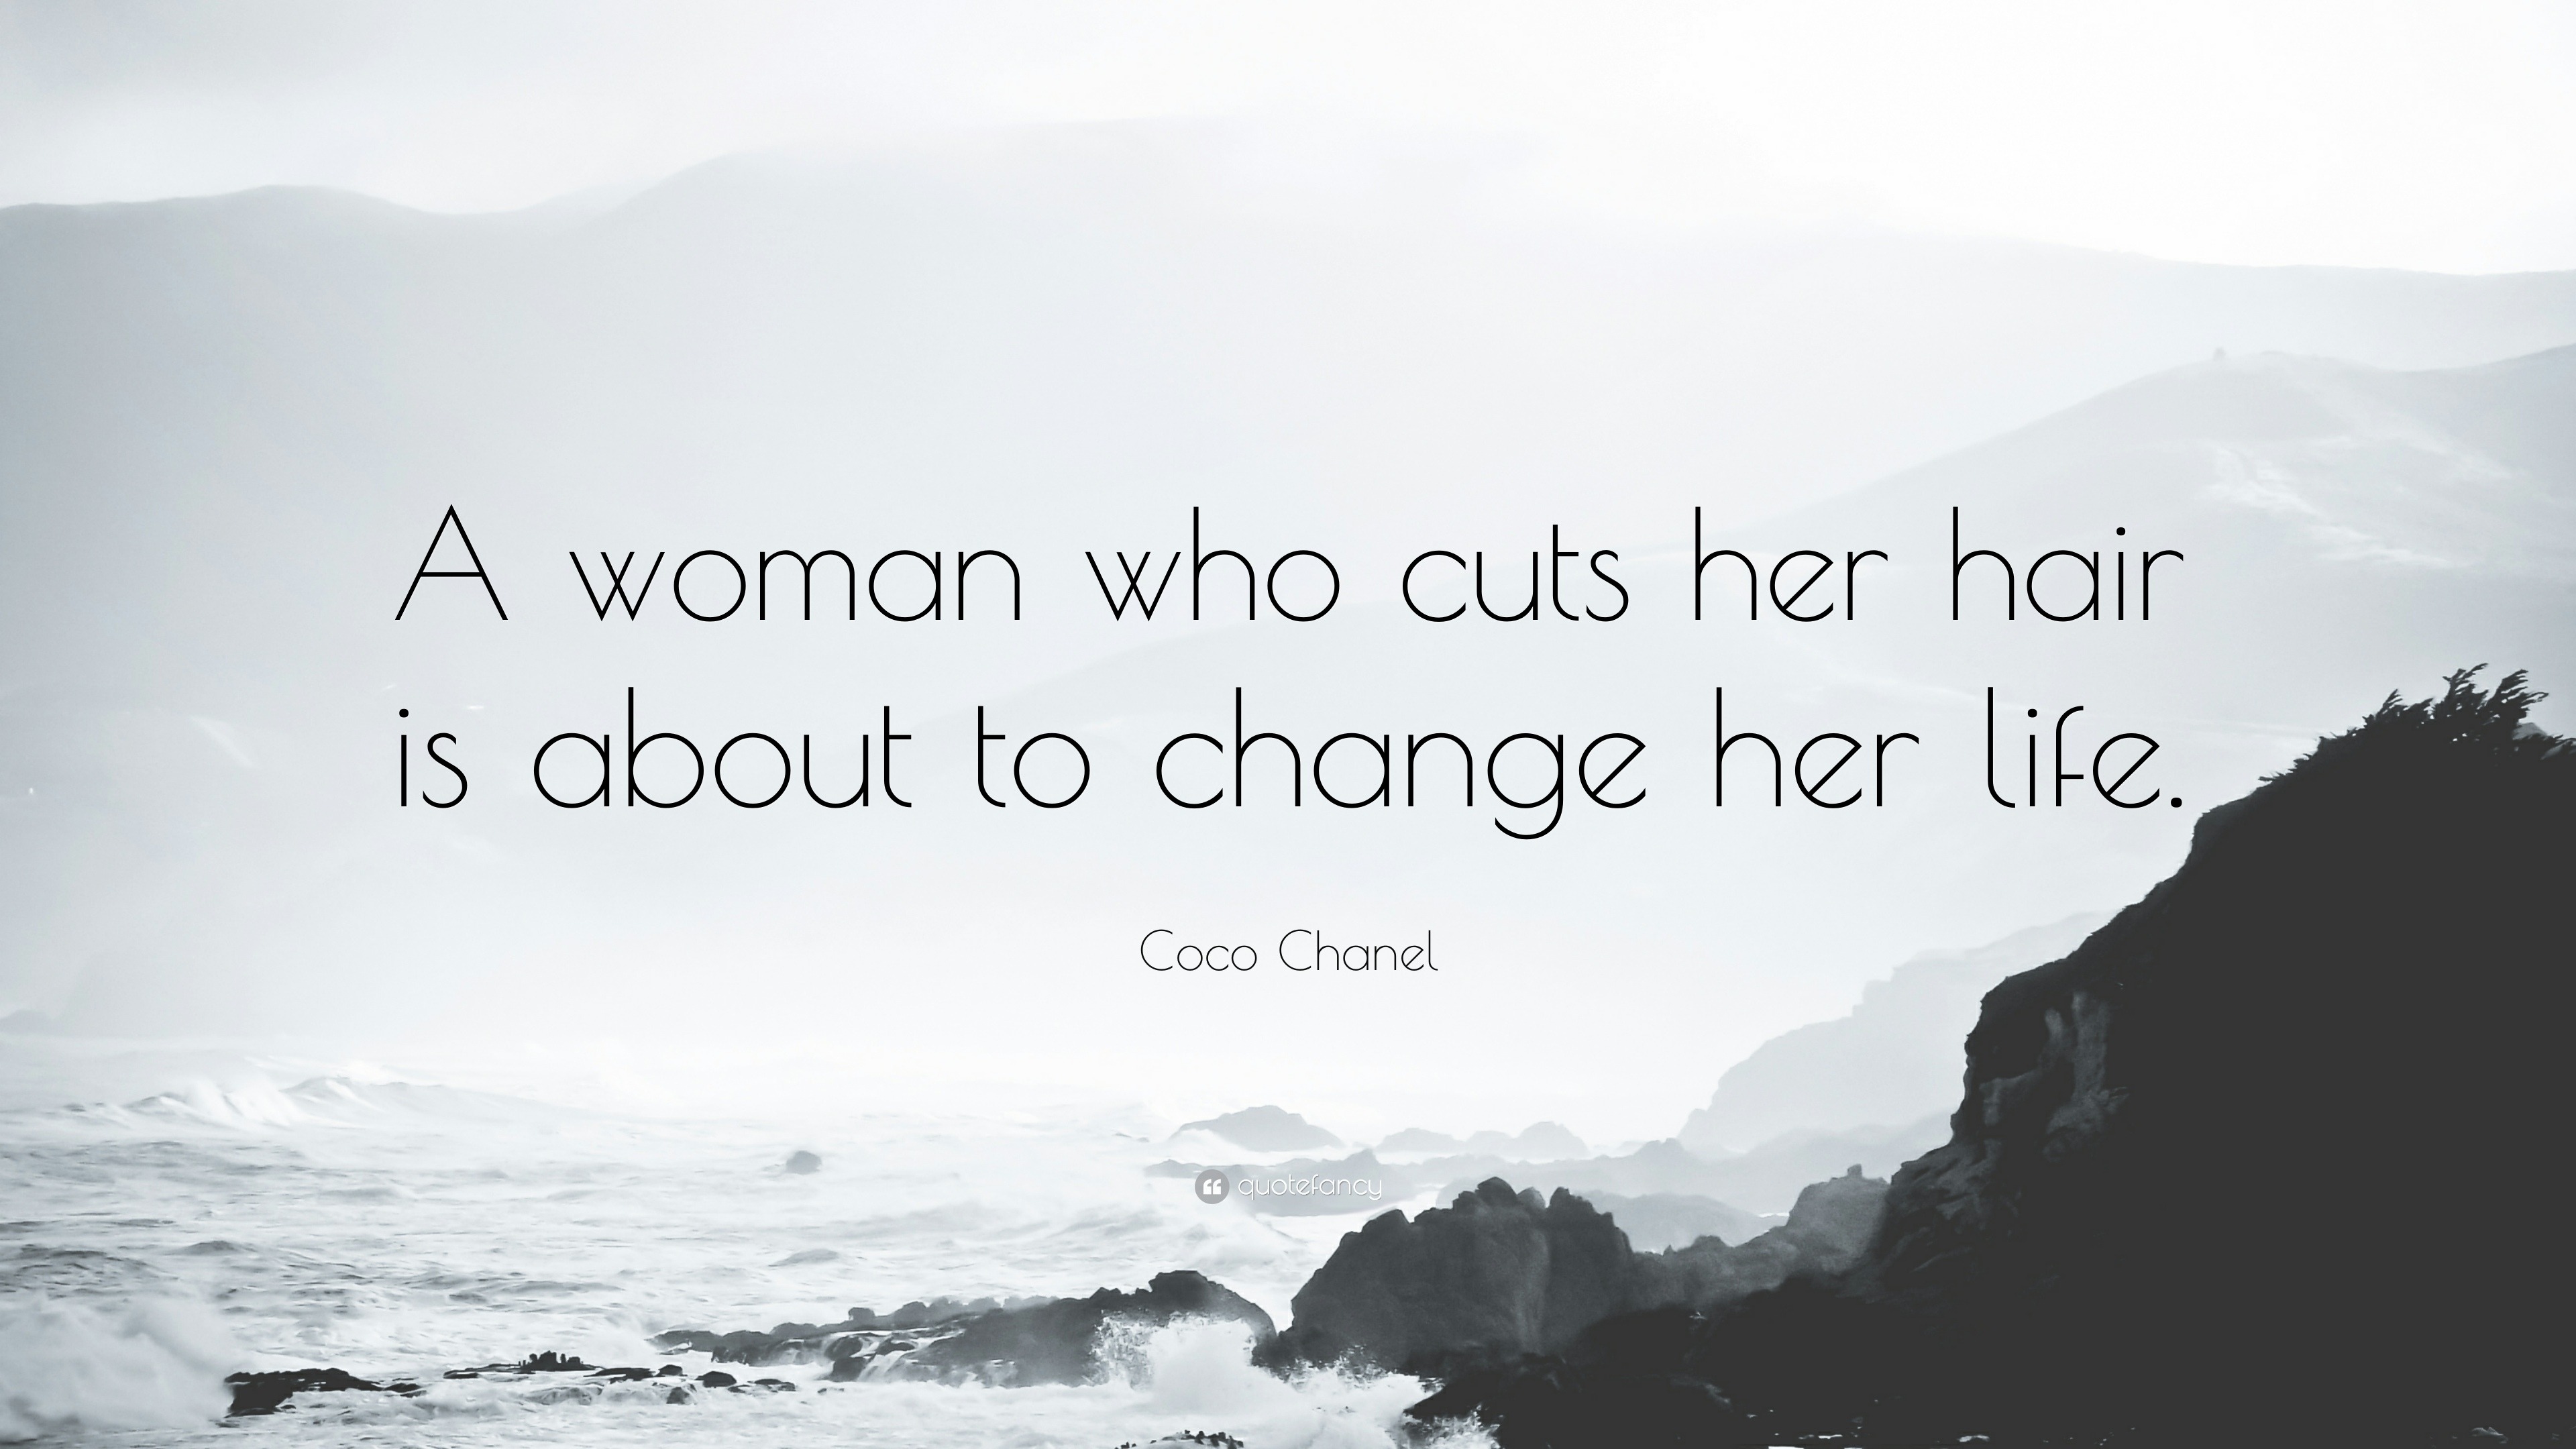 Black Coco Chanel Woman Who Cuts Her Hair Change Life Quote Wall Art Print   The Card Zoo